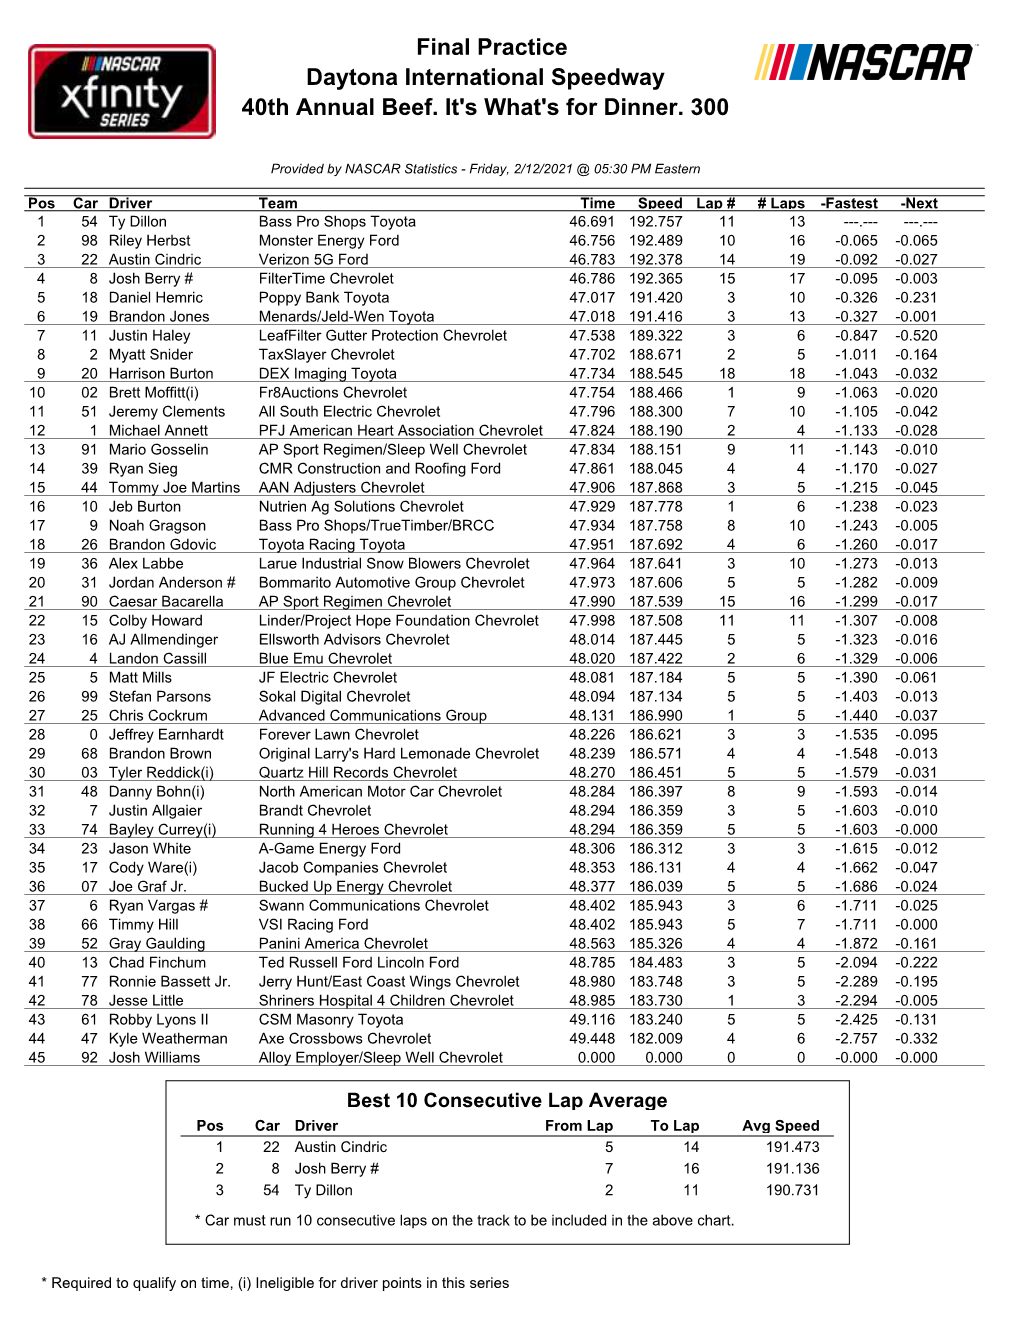 Xfinity Series Practice Results